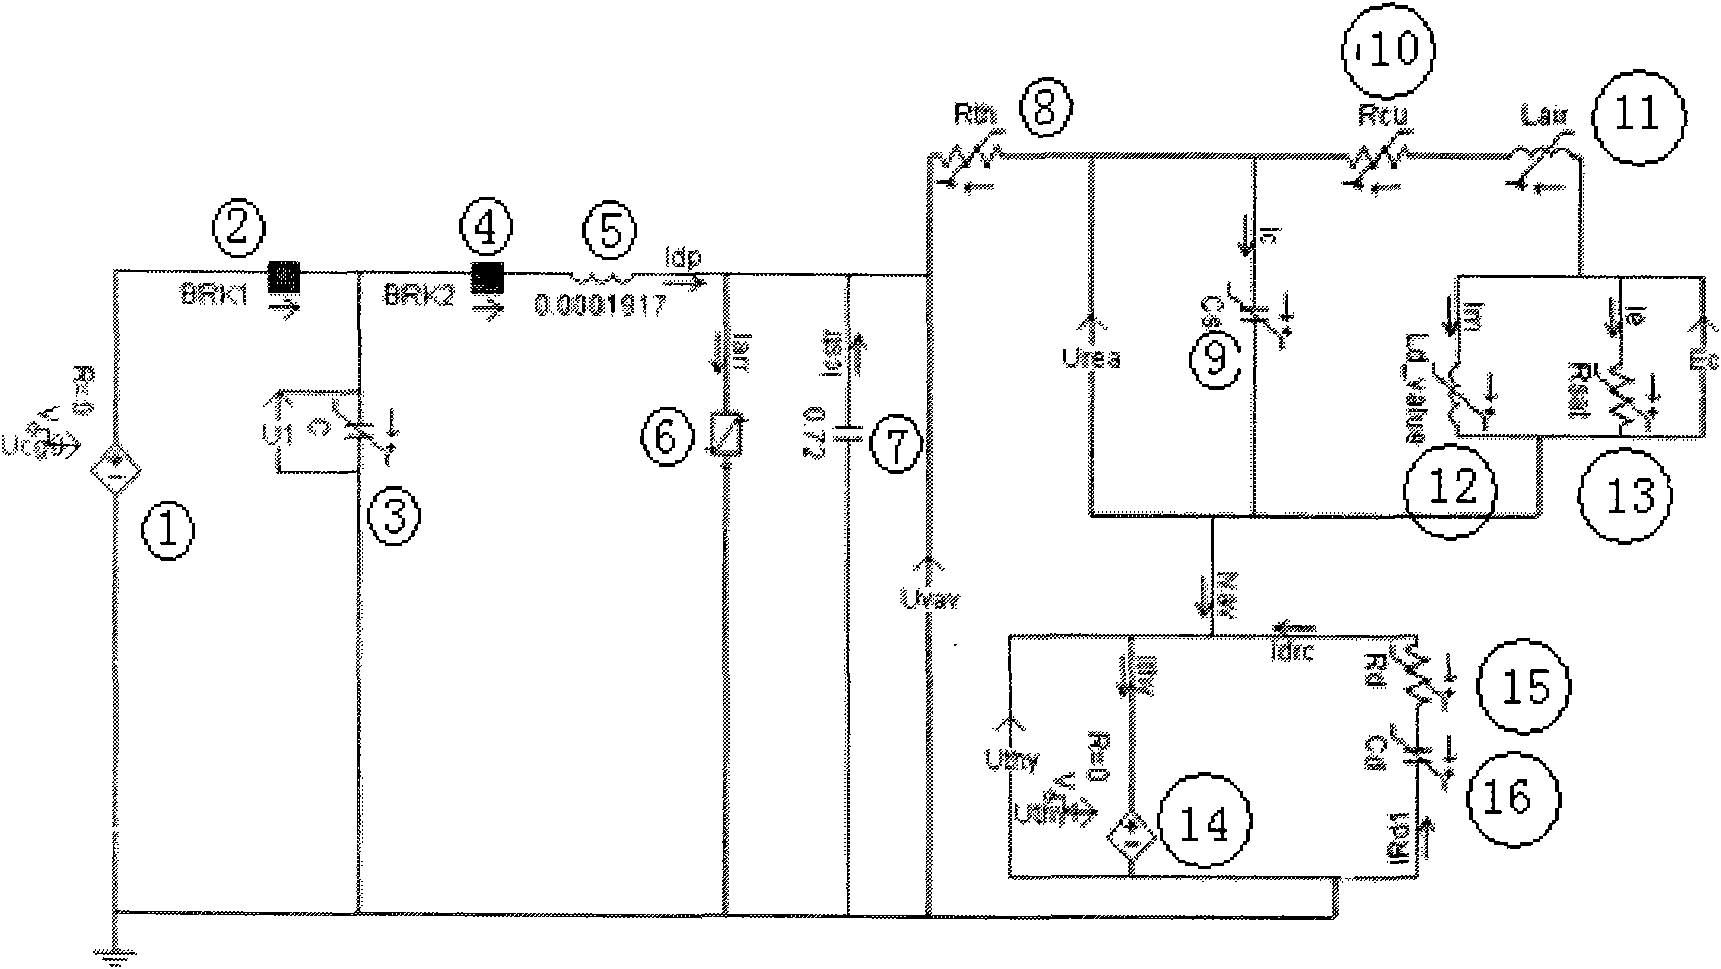 Method for analyzing performance of saturation reactor for converter valve under the condition of switching on thyristor